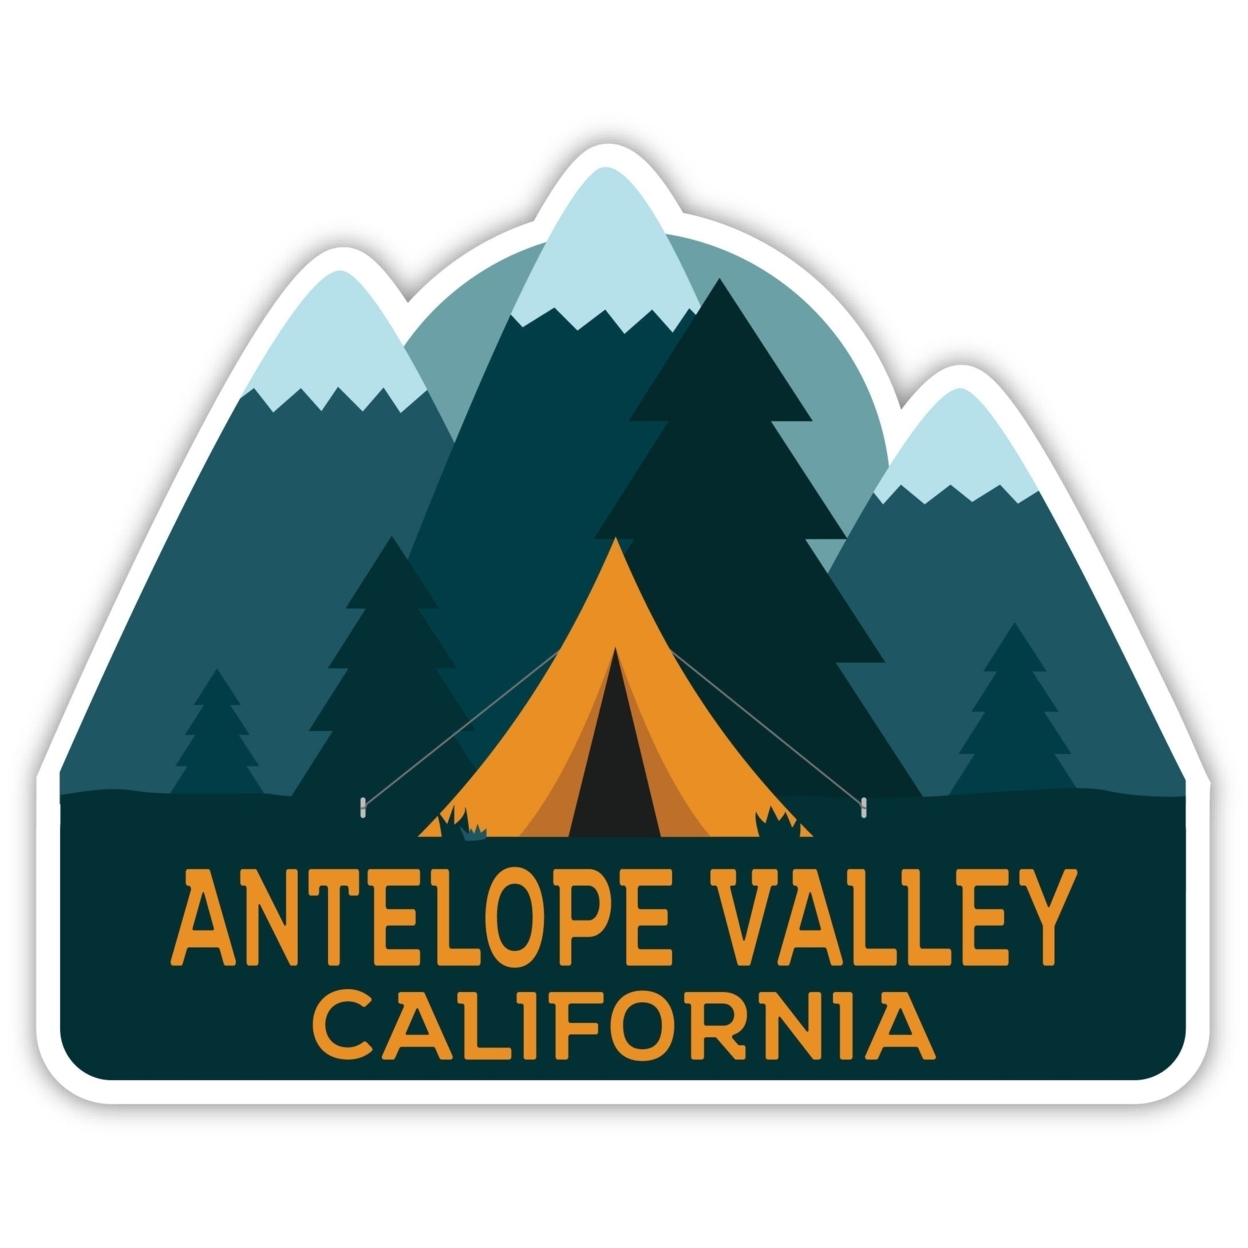 Antelope Valley California Souvenir Decorative Stickers (Choose Theme And Size) - Single Unit, 4-Inch, Tent